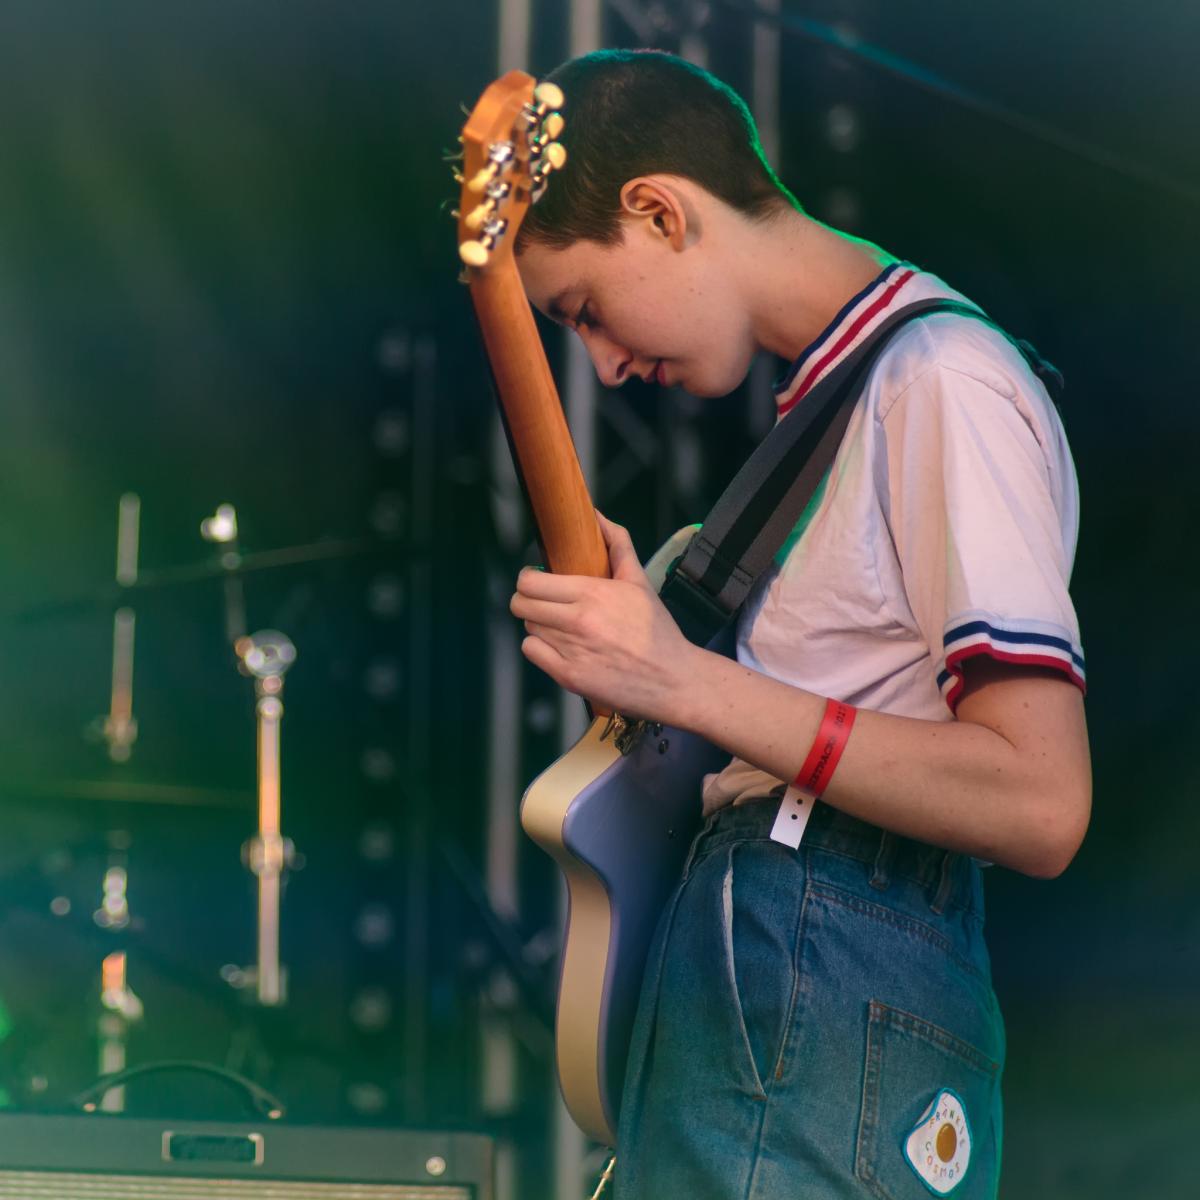 Frankie Cosmos @ Indietracks, 29th July 2017